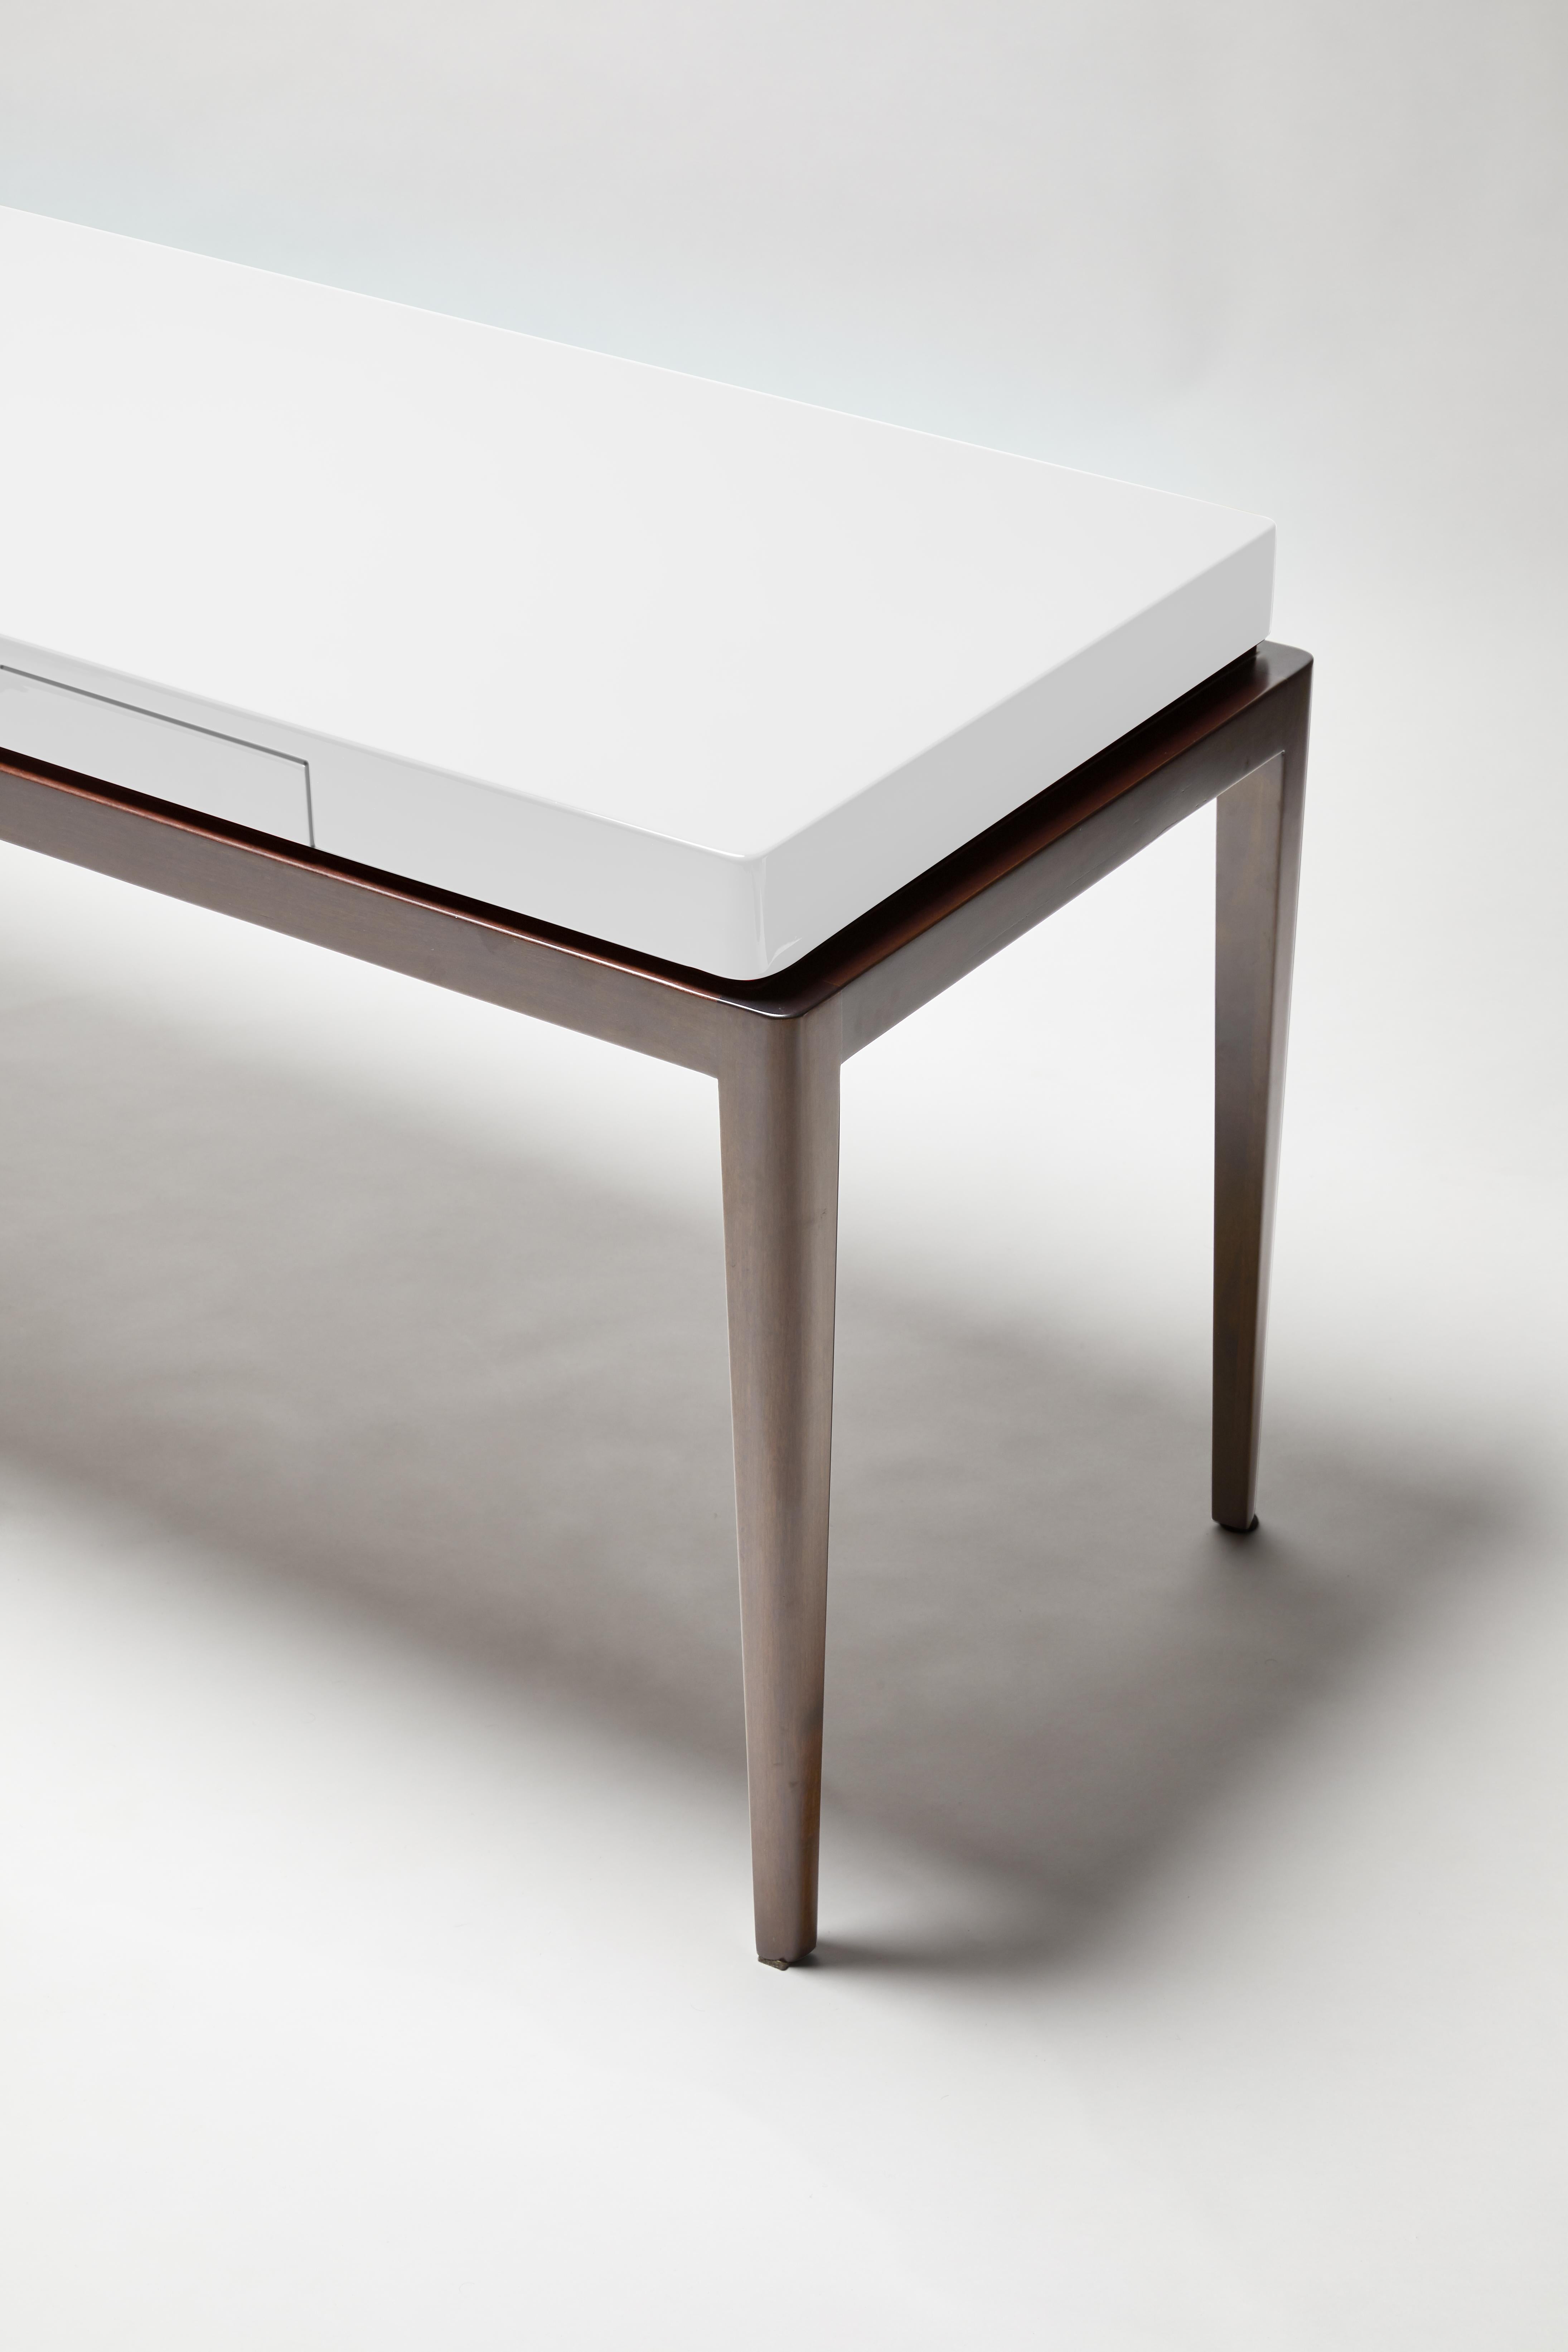 Contemporary Console, TARA by Reda Amalou, 2020, Beige Lacquer Top, Walnut, 160 cm For Sale